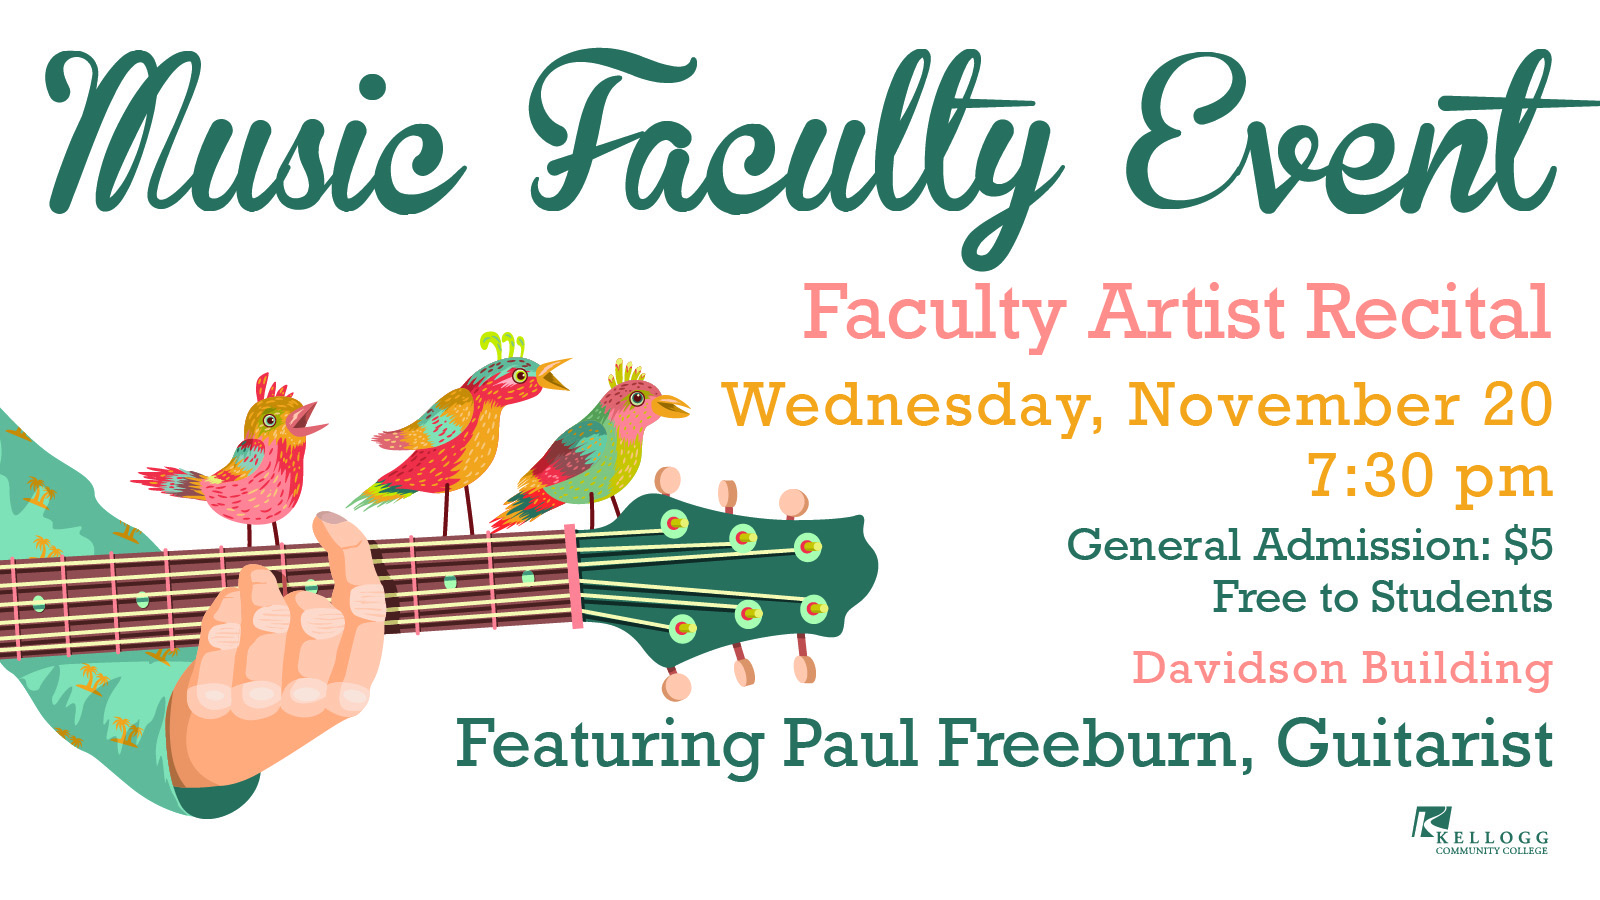 A decorative text slide promoting Paul Freeburn's upcoming recital at KCC, with an illustration of a guitar and birds on it.